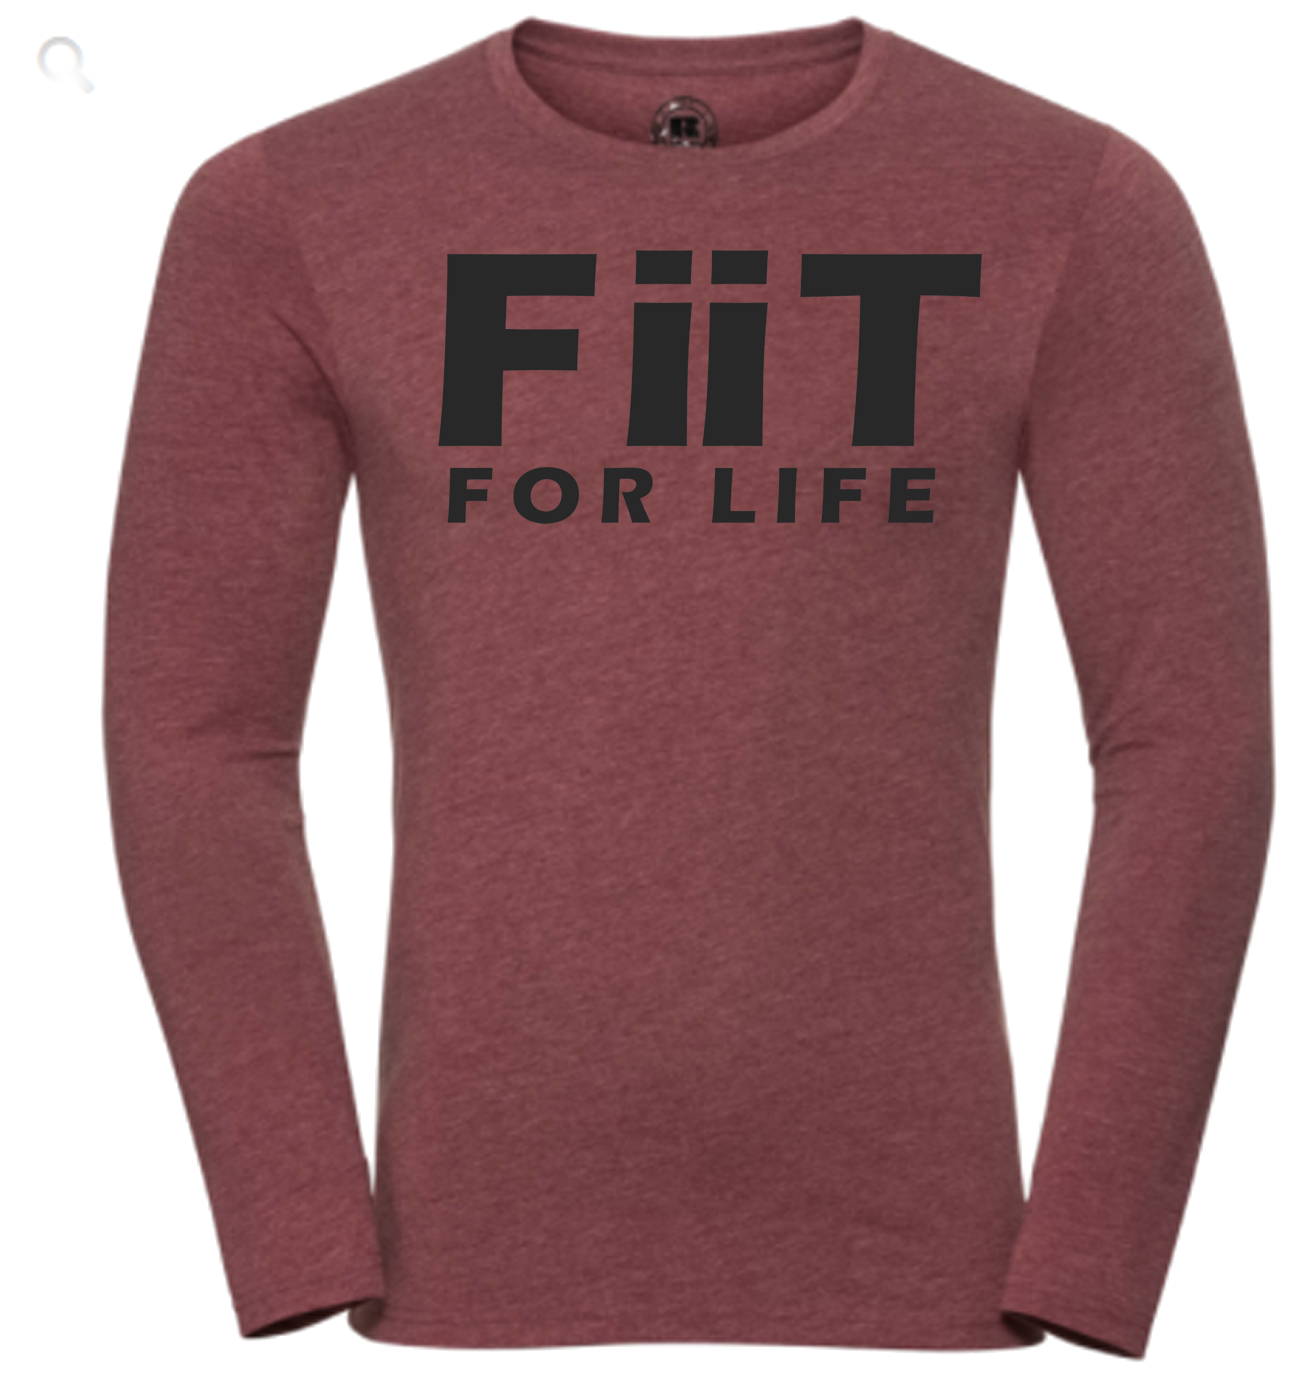 FiiT For Life - Long Sleeve Training Top